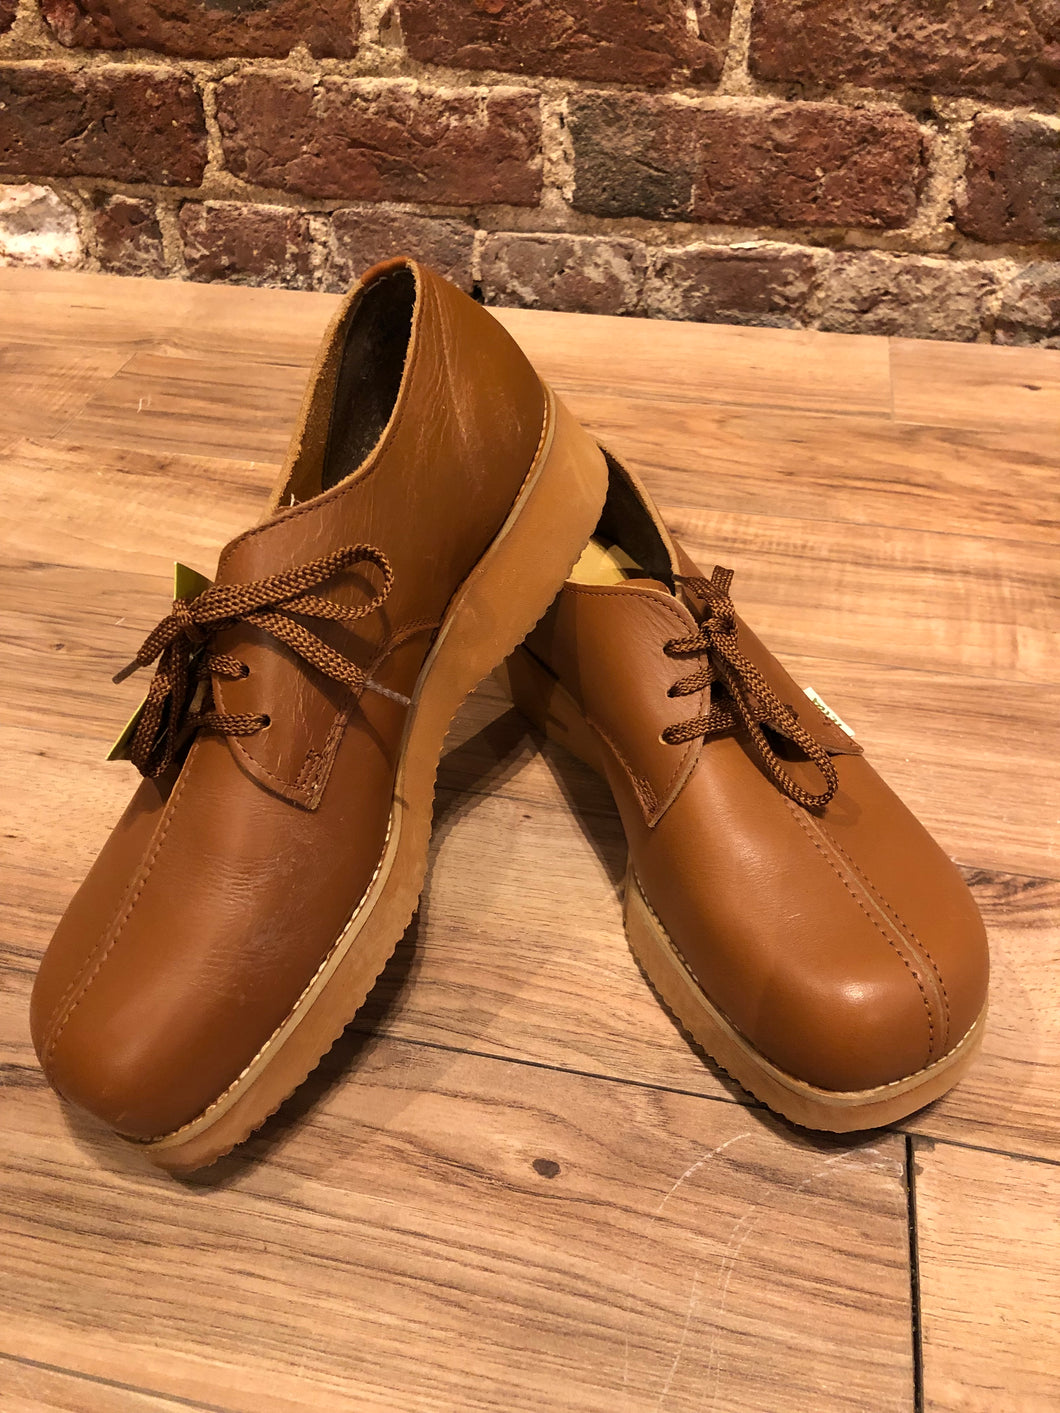 Kingspier vintage - Vintage deadstock Terra safety footwear with leather upper, steel tie, and cushioned sole.

Made in Canada.

Size US Mens 9E, EUR 42